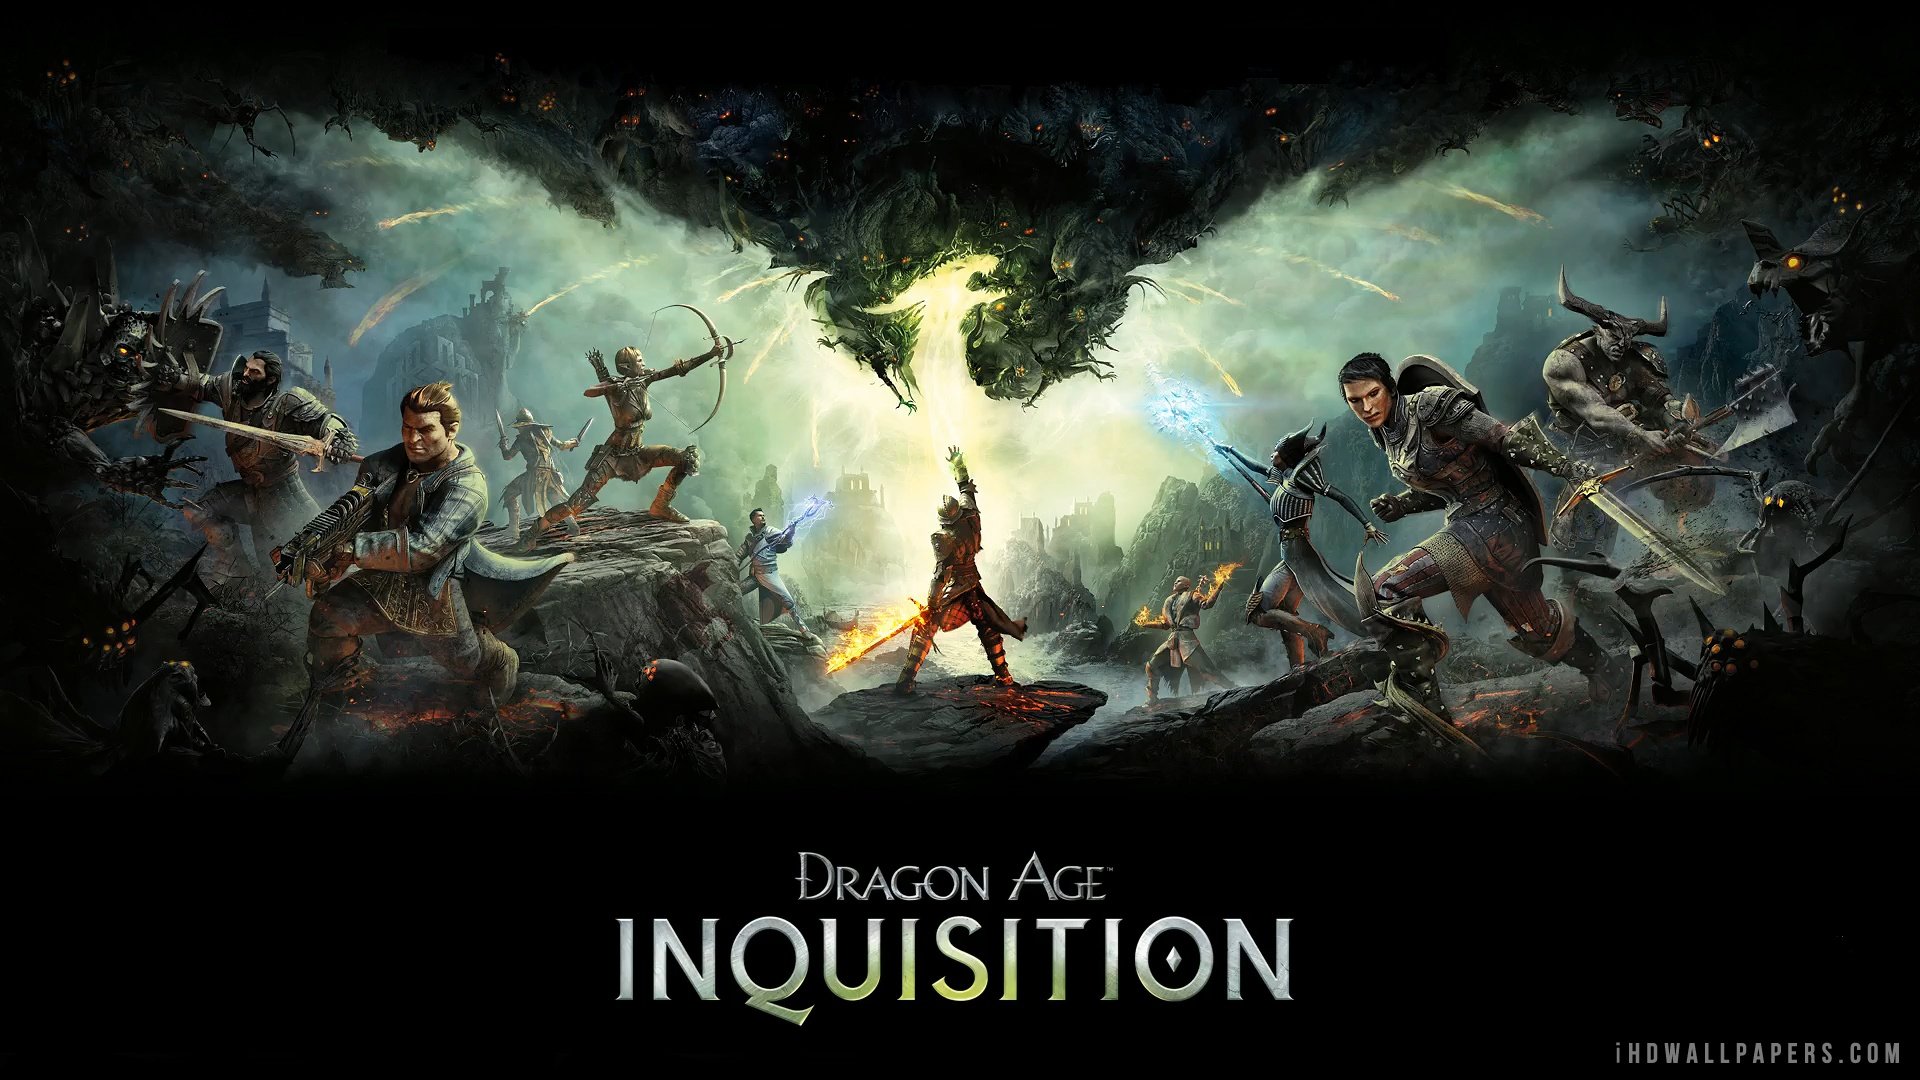 Dragon Age Inquisition HD Wallpaper   iHD Wallpapers 1920x1080